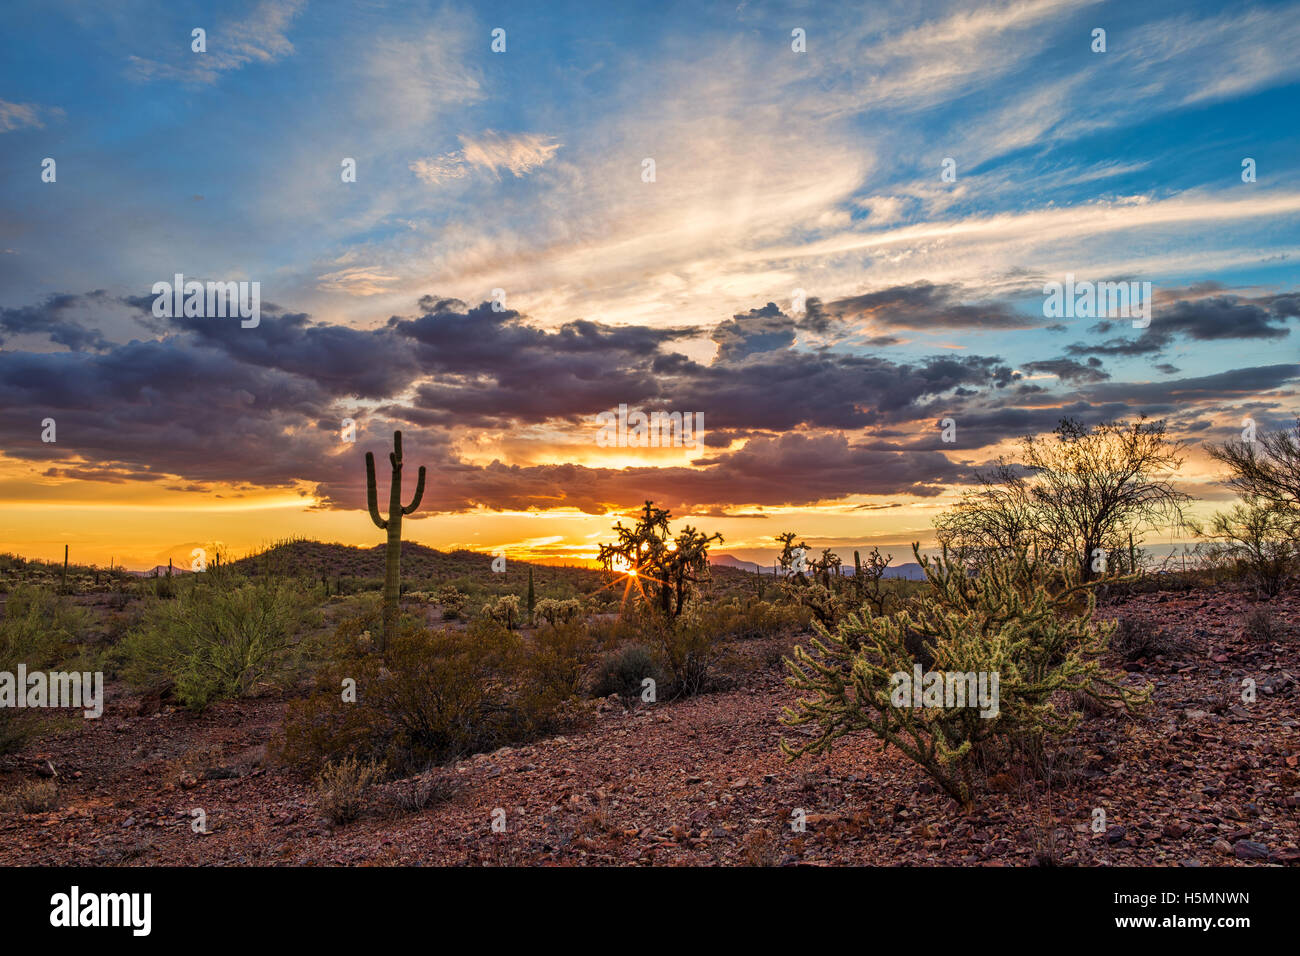 Colorful Sunset Over The Sonoran Desert Landscape In | Free Download ...